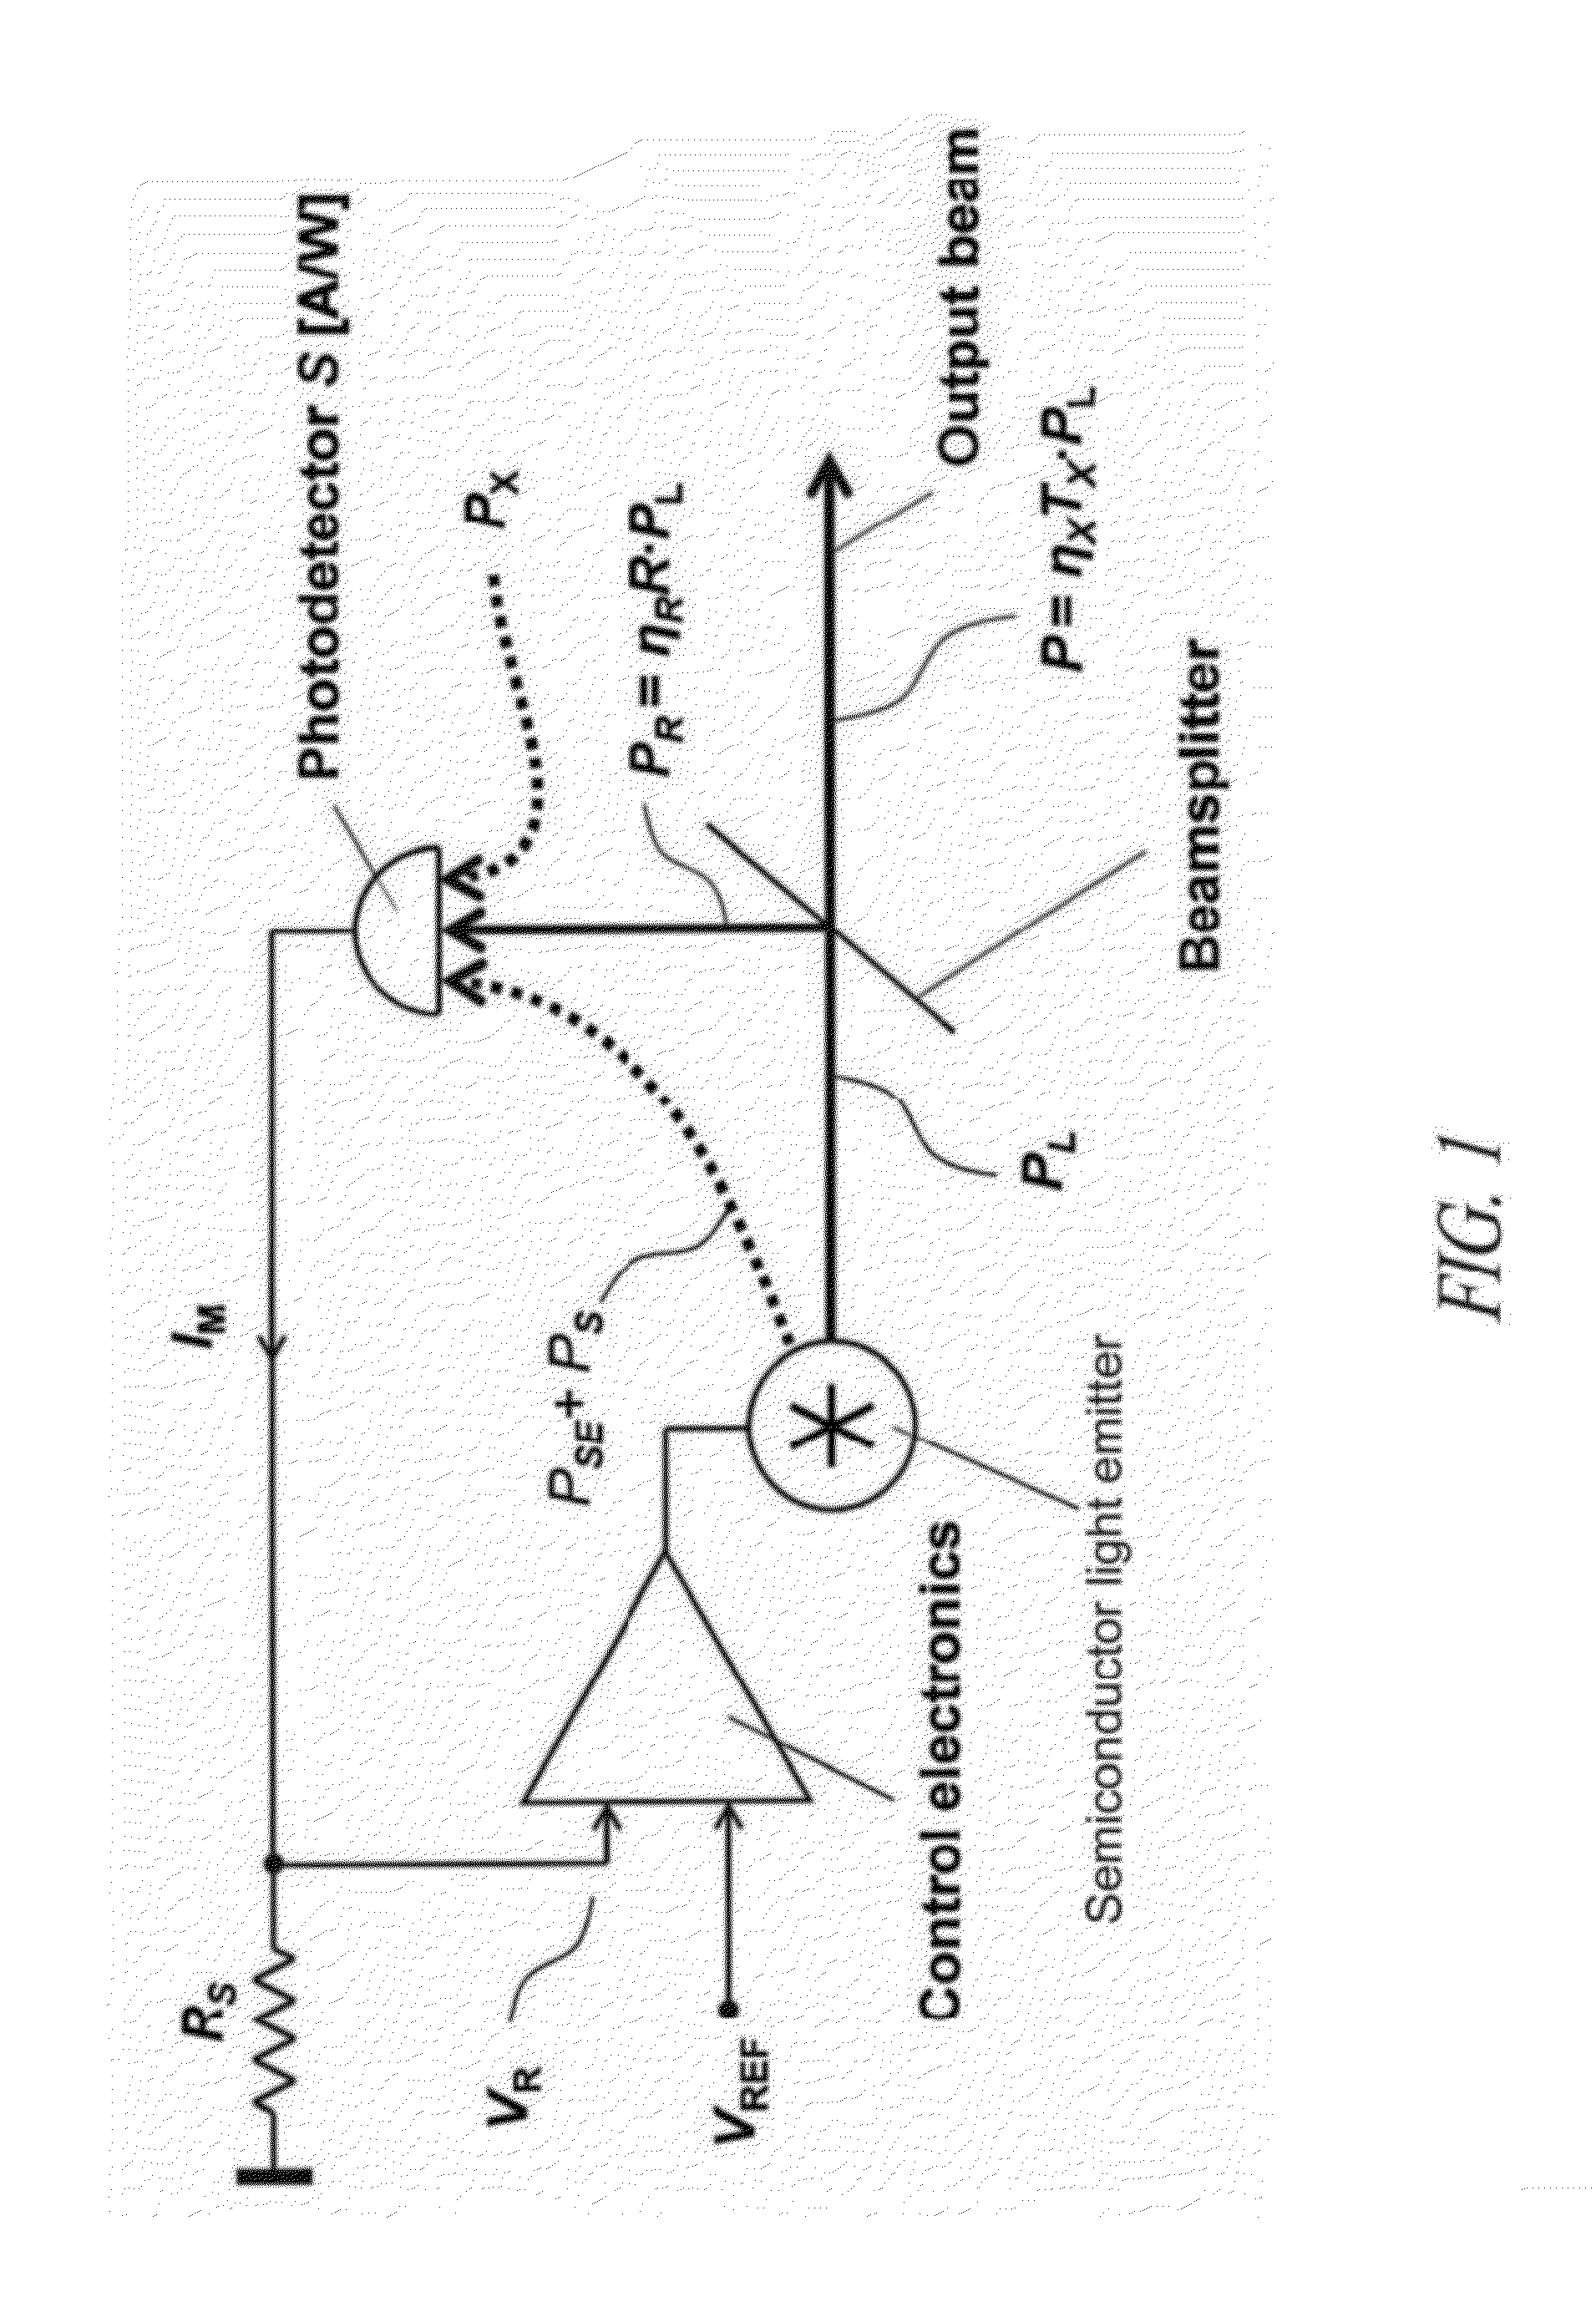 High-stability light source system and method of manufacturing